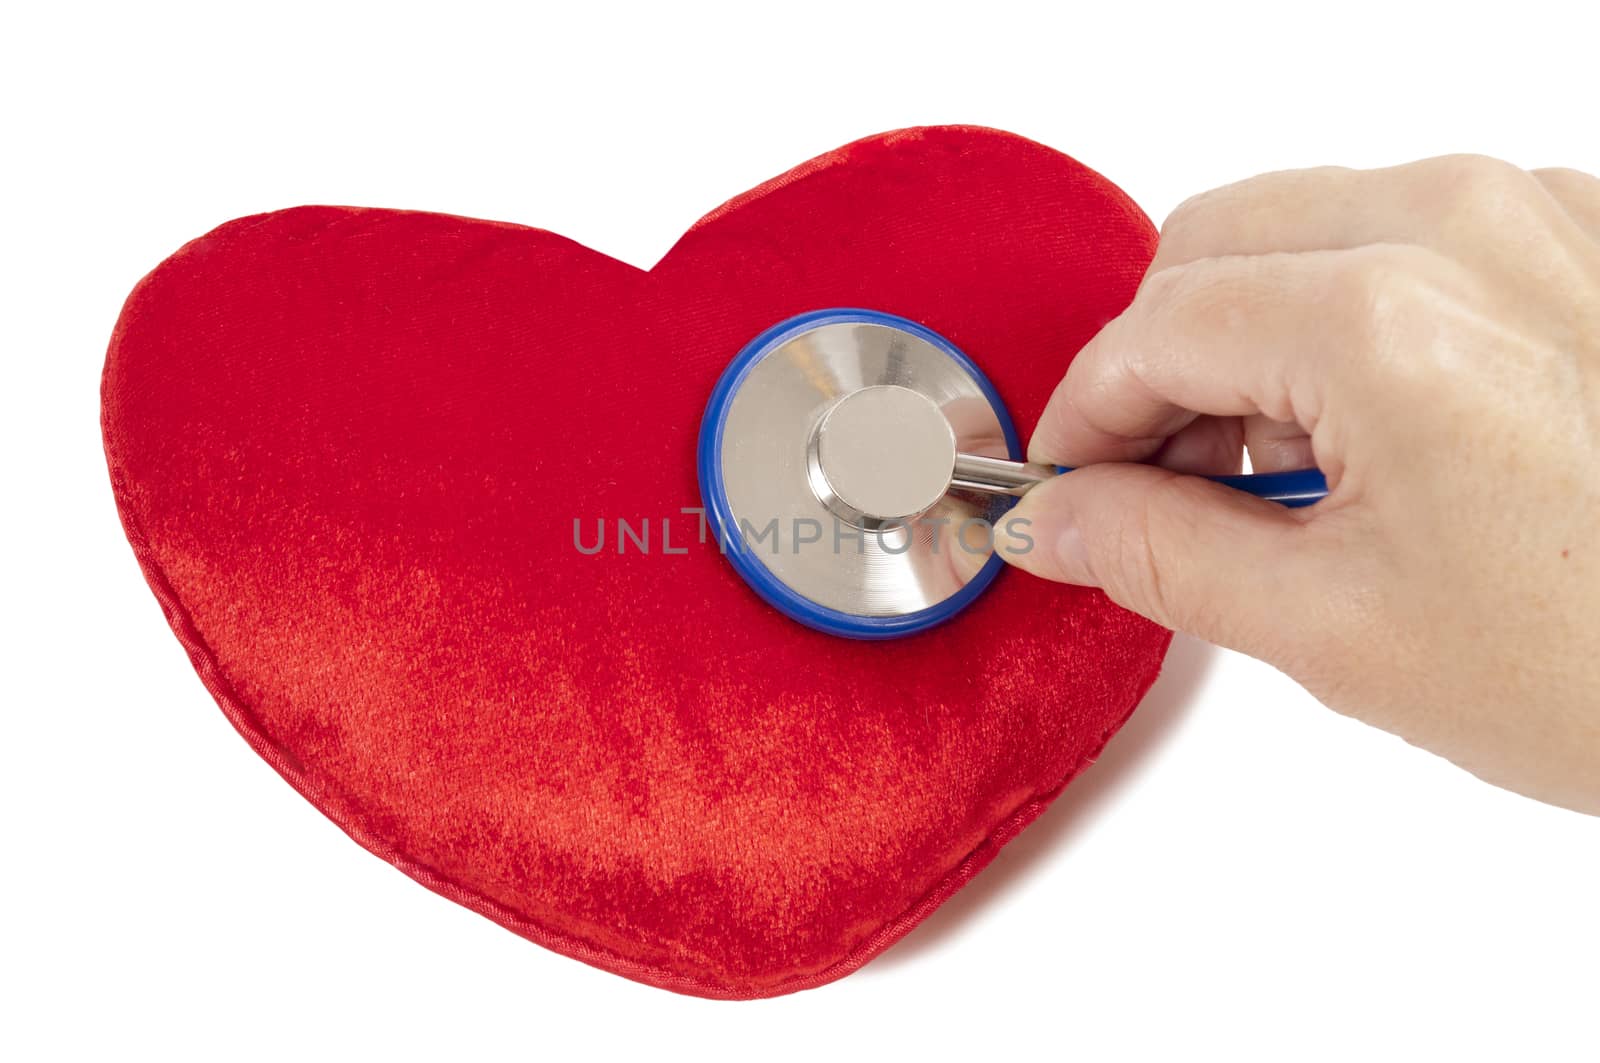 Heart Shaped Pillow With Stethoscope by stockbuster1